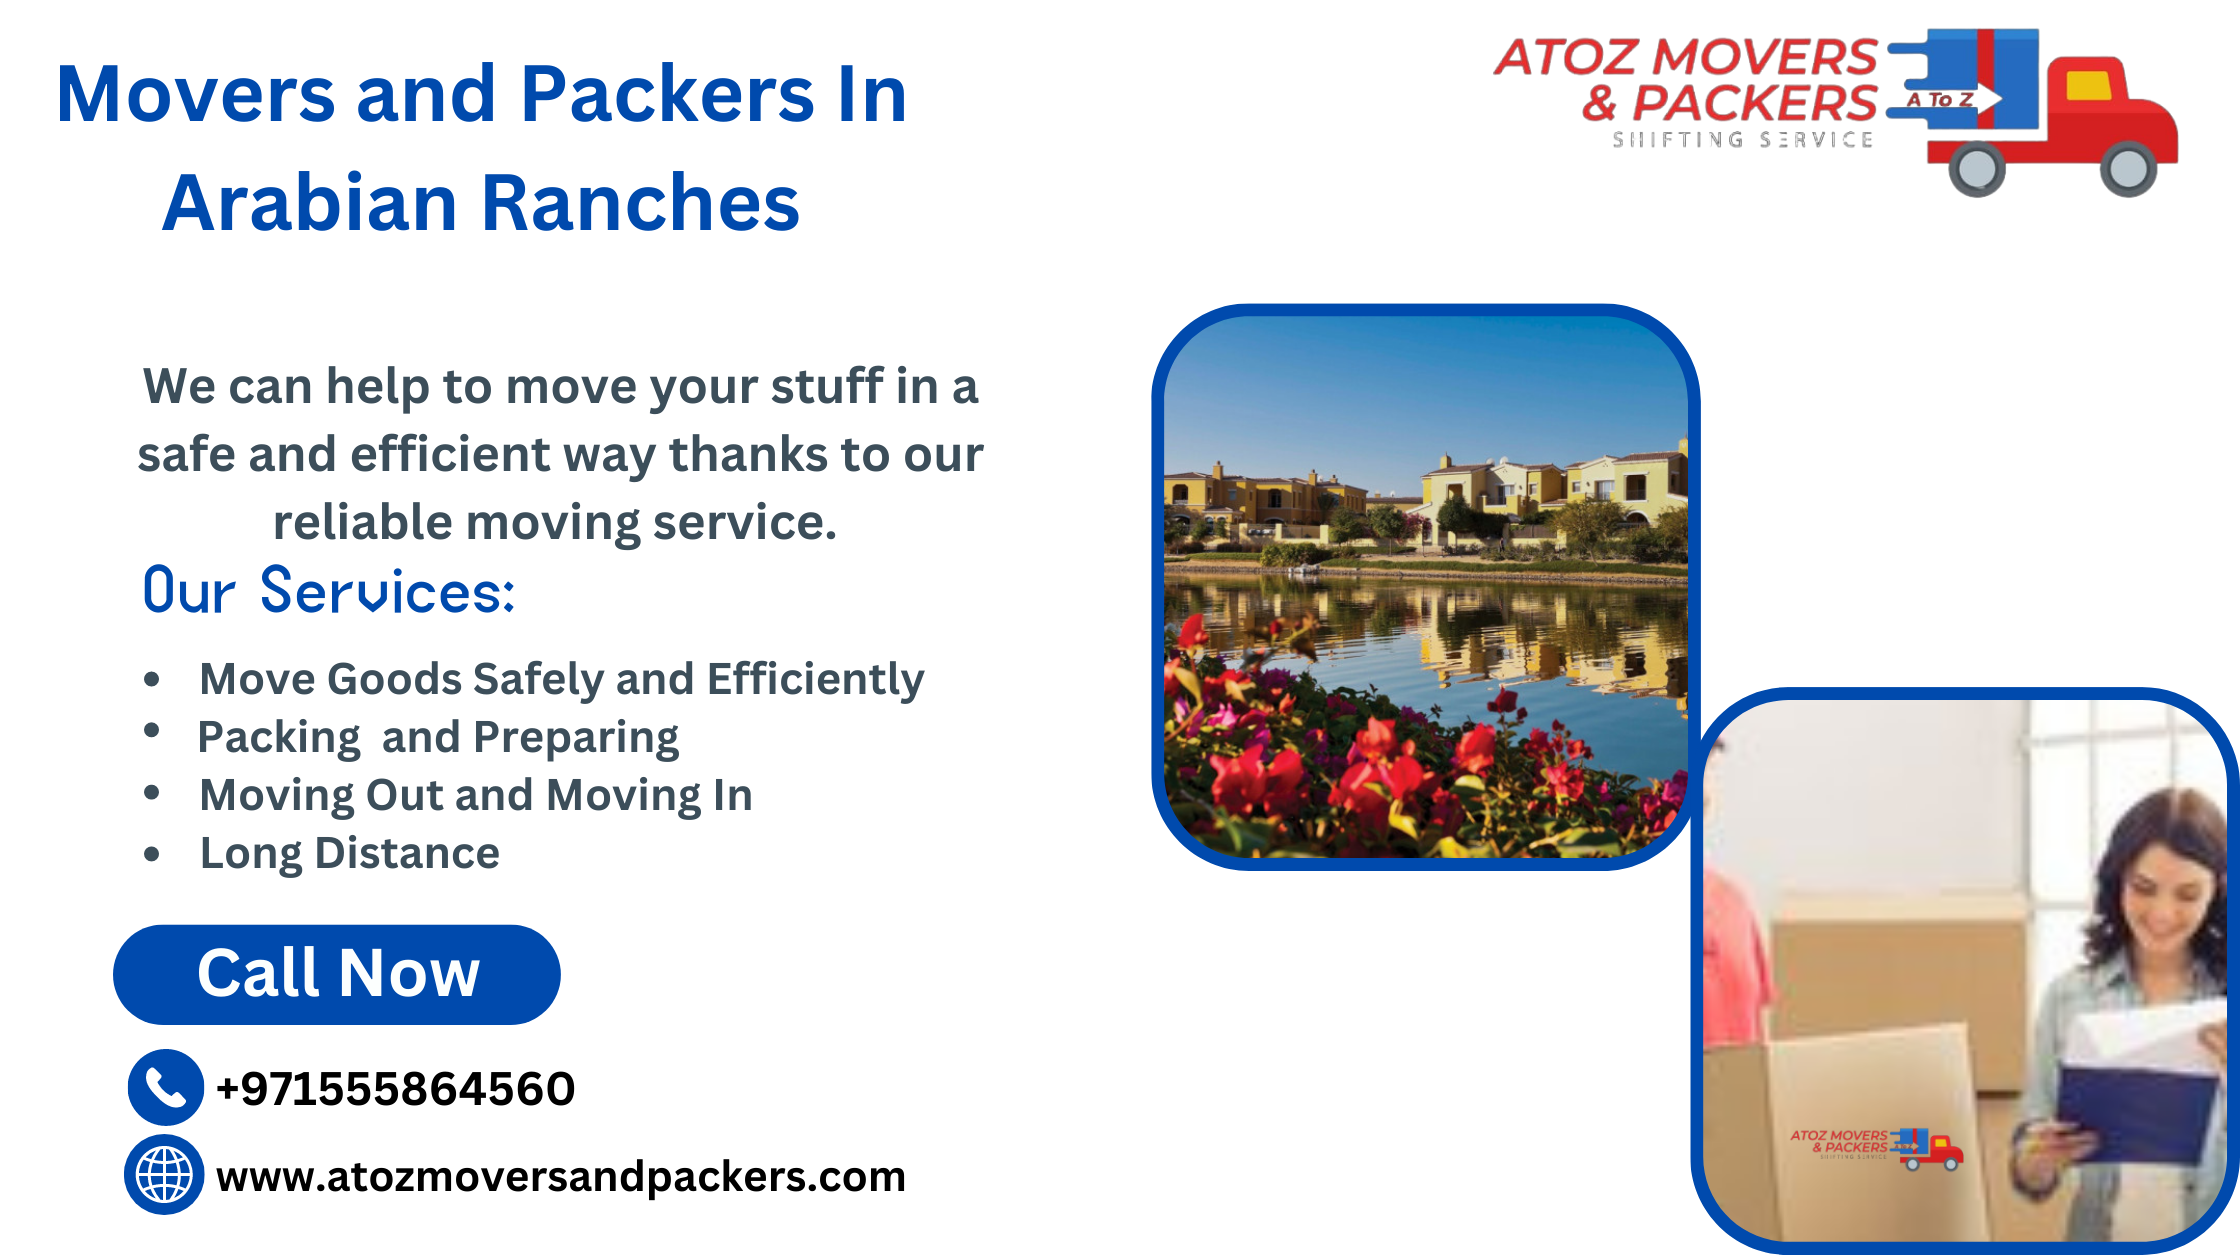 Movers and packers in arabian ranches